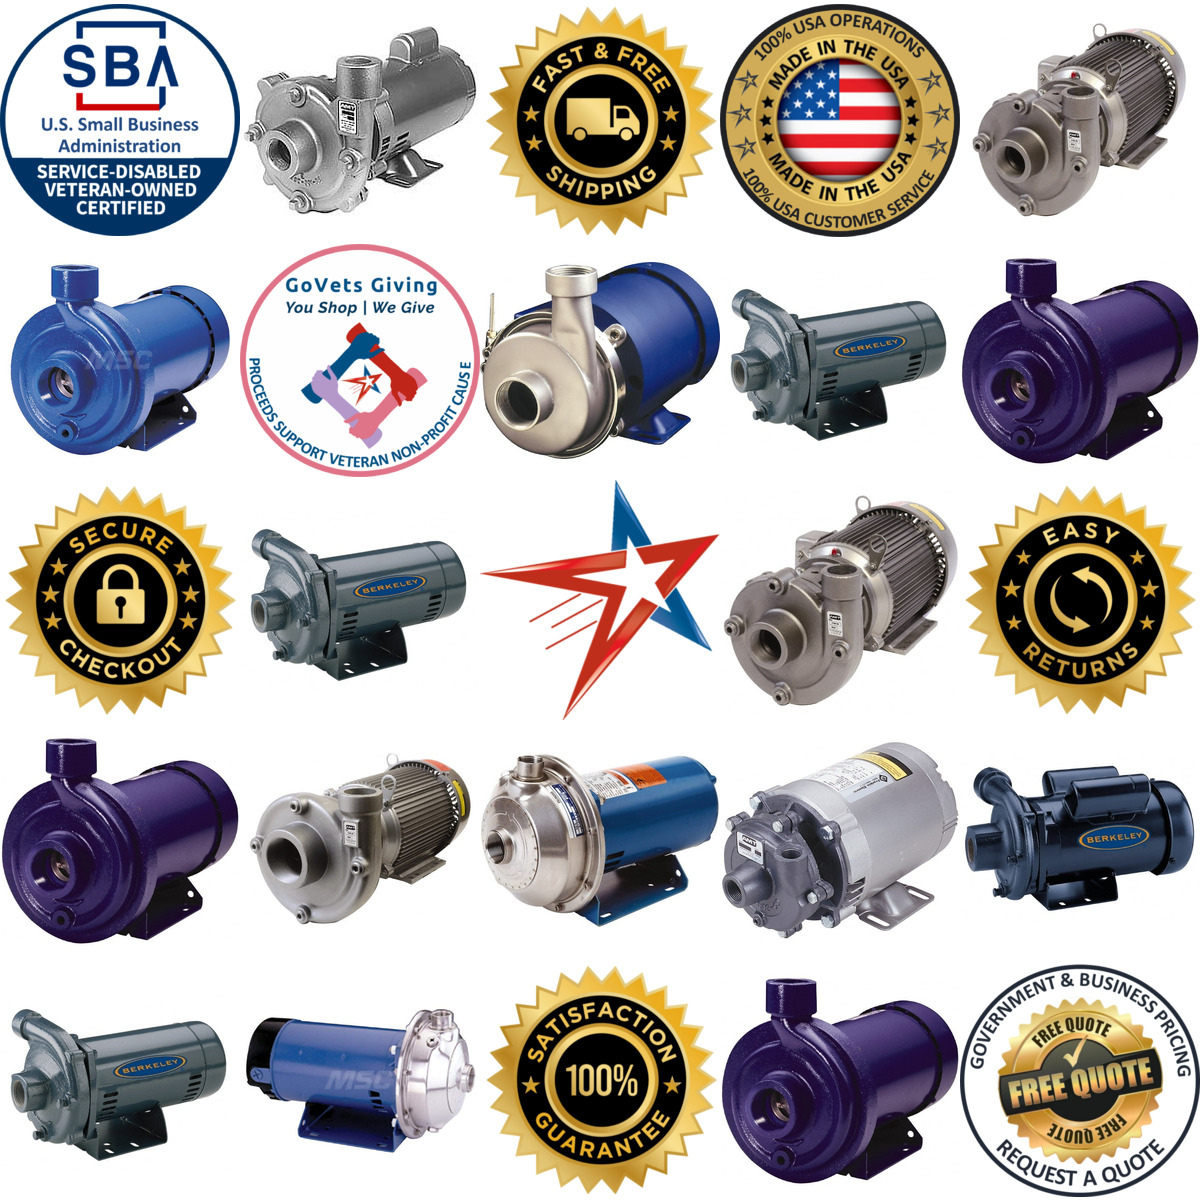 A selection of Straight Pumps products on GoVets